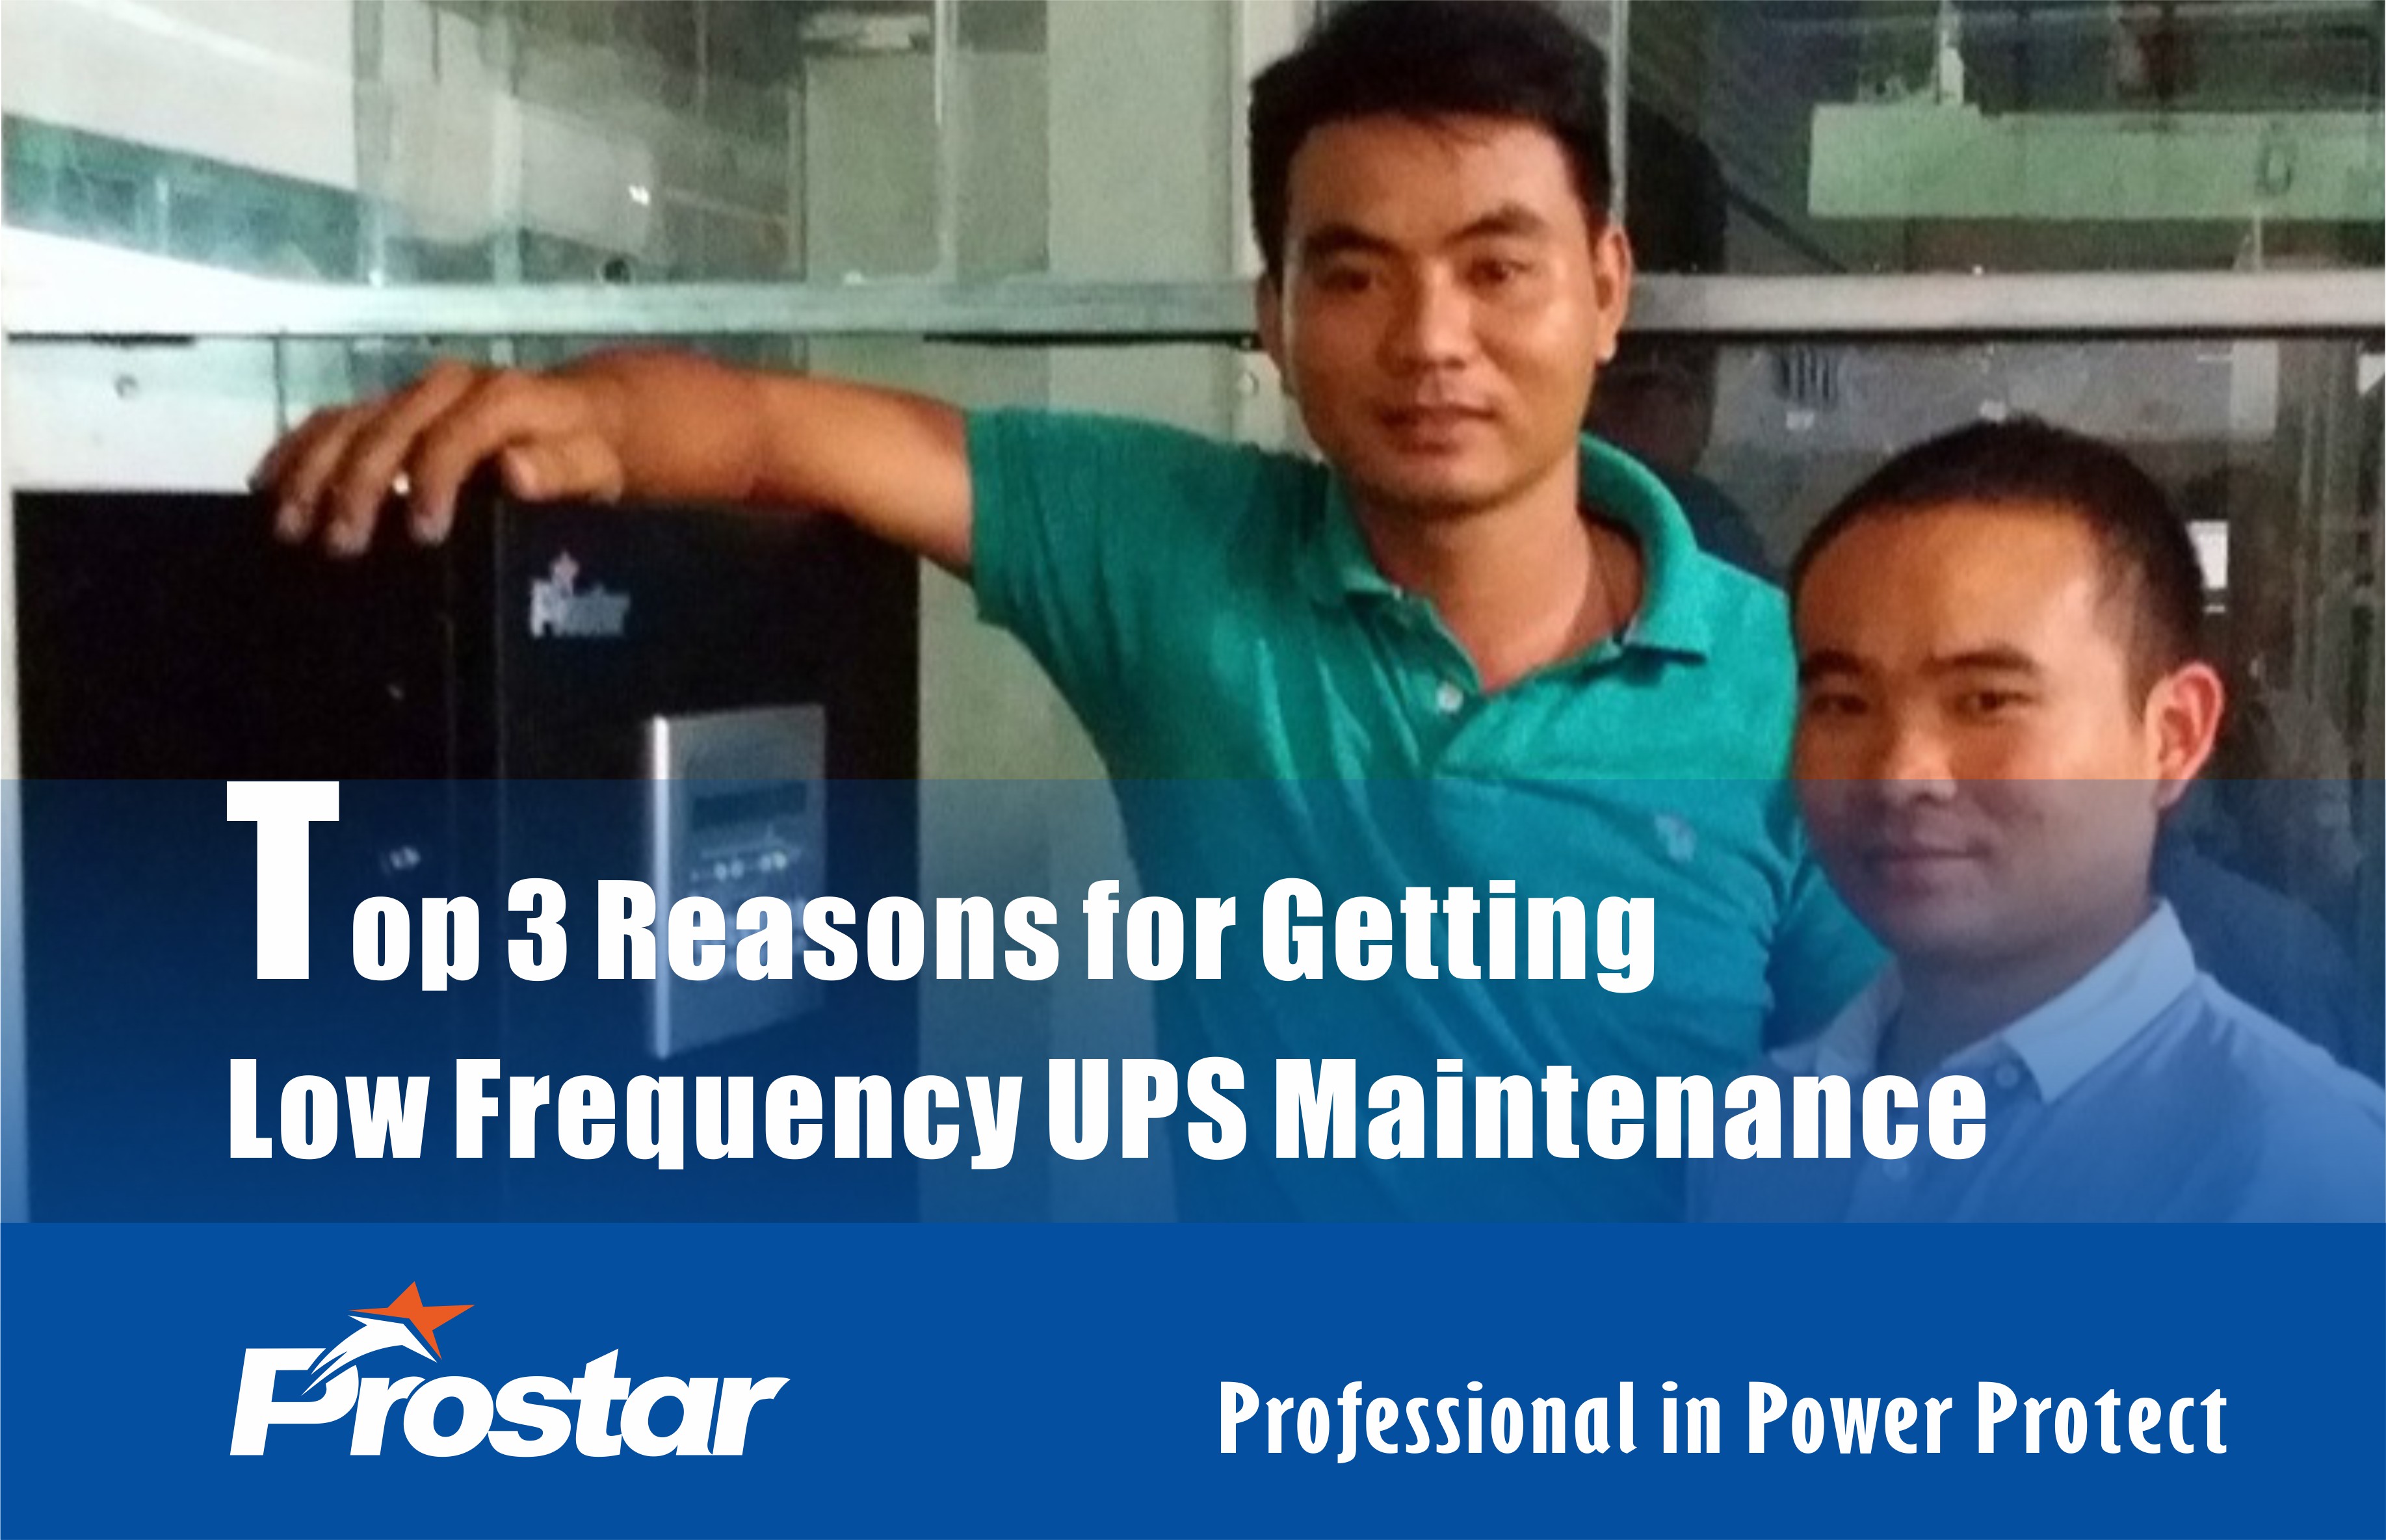 Top 3 Reasons for Getting Low Frequency UPS Maintenance